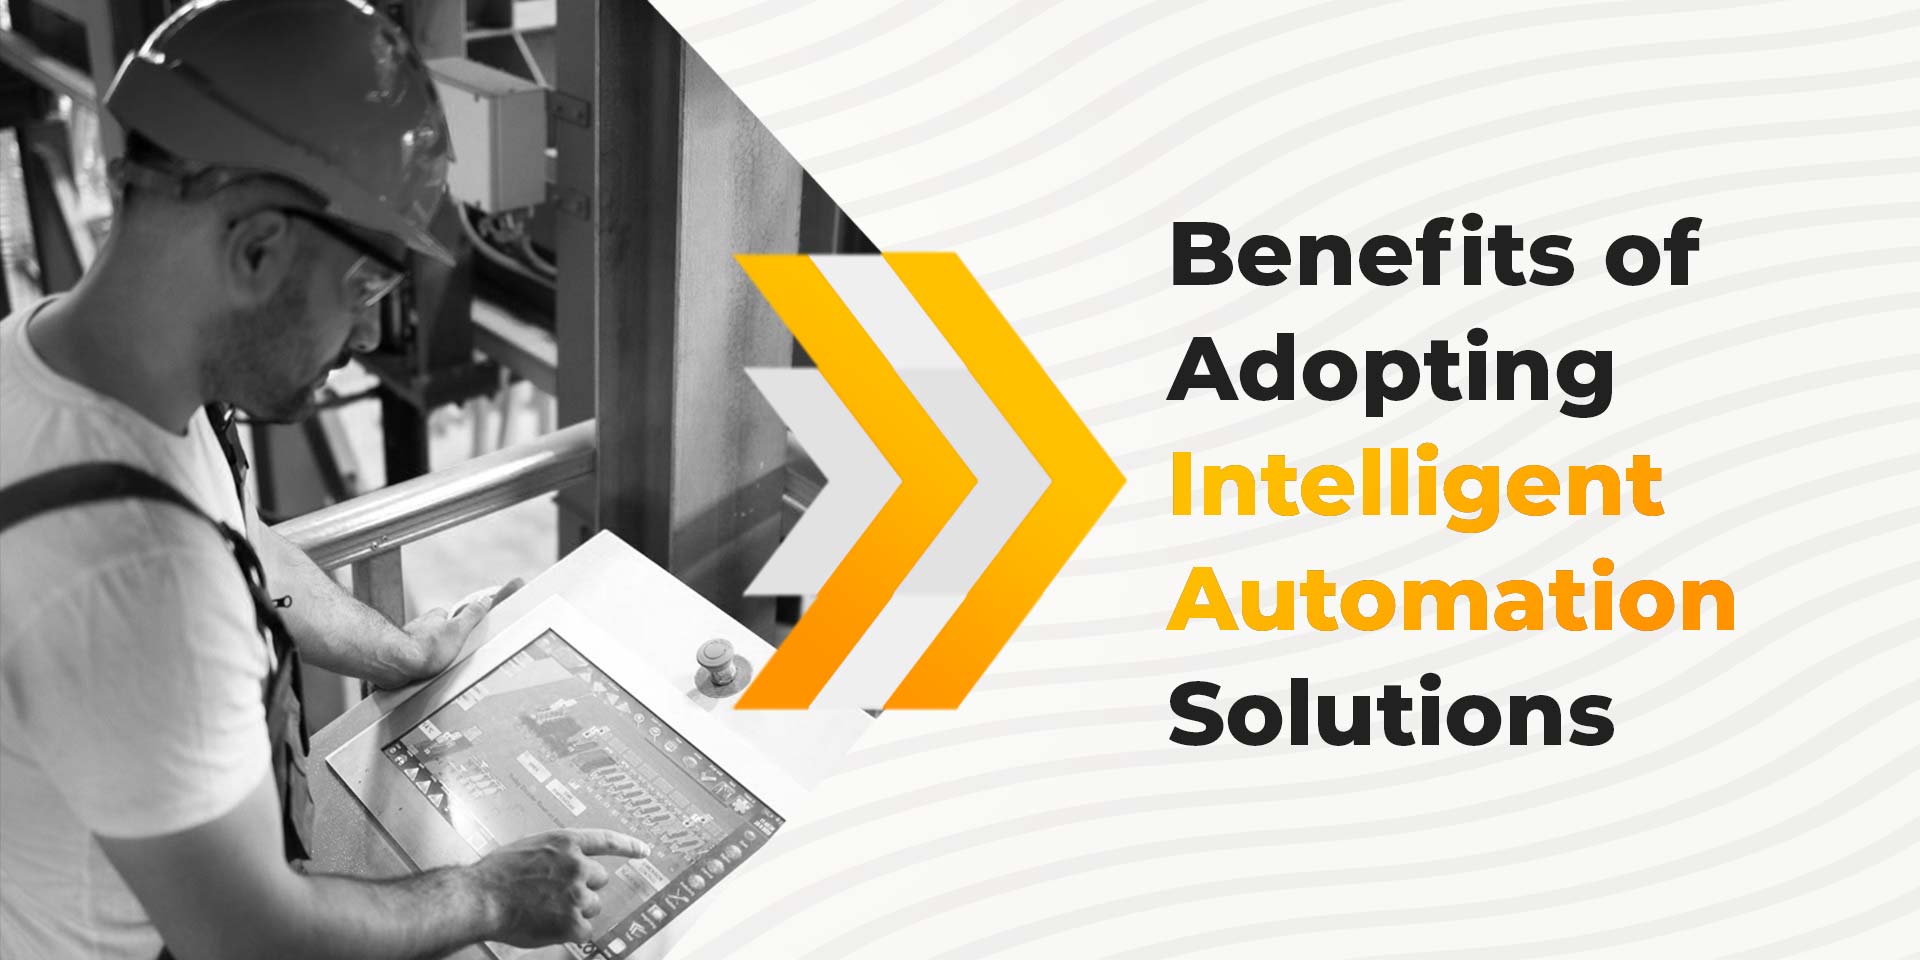 Benefits of Adopting Intelligent Automation Solutions